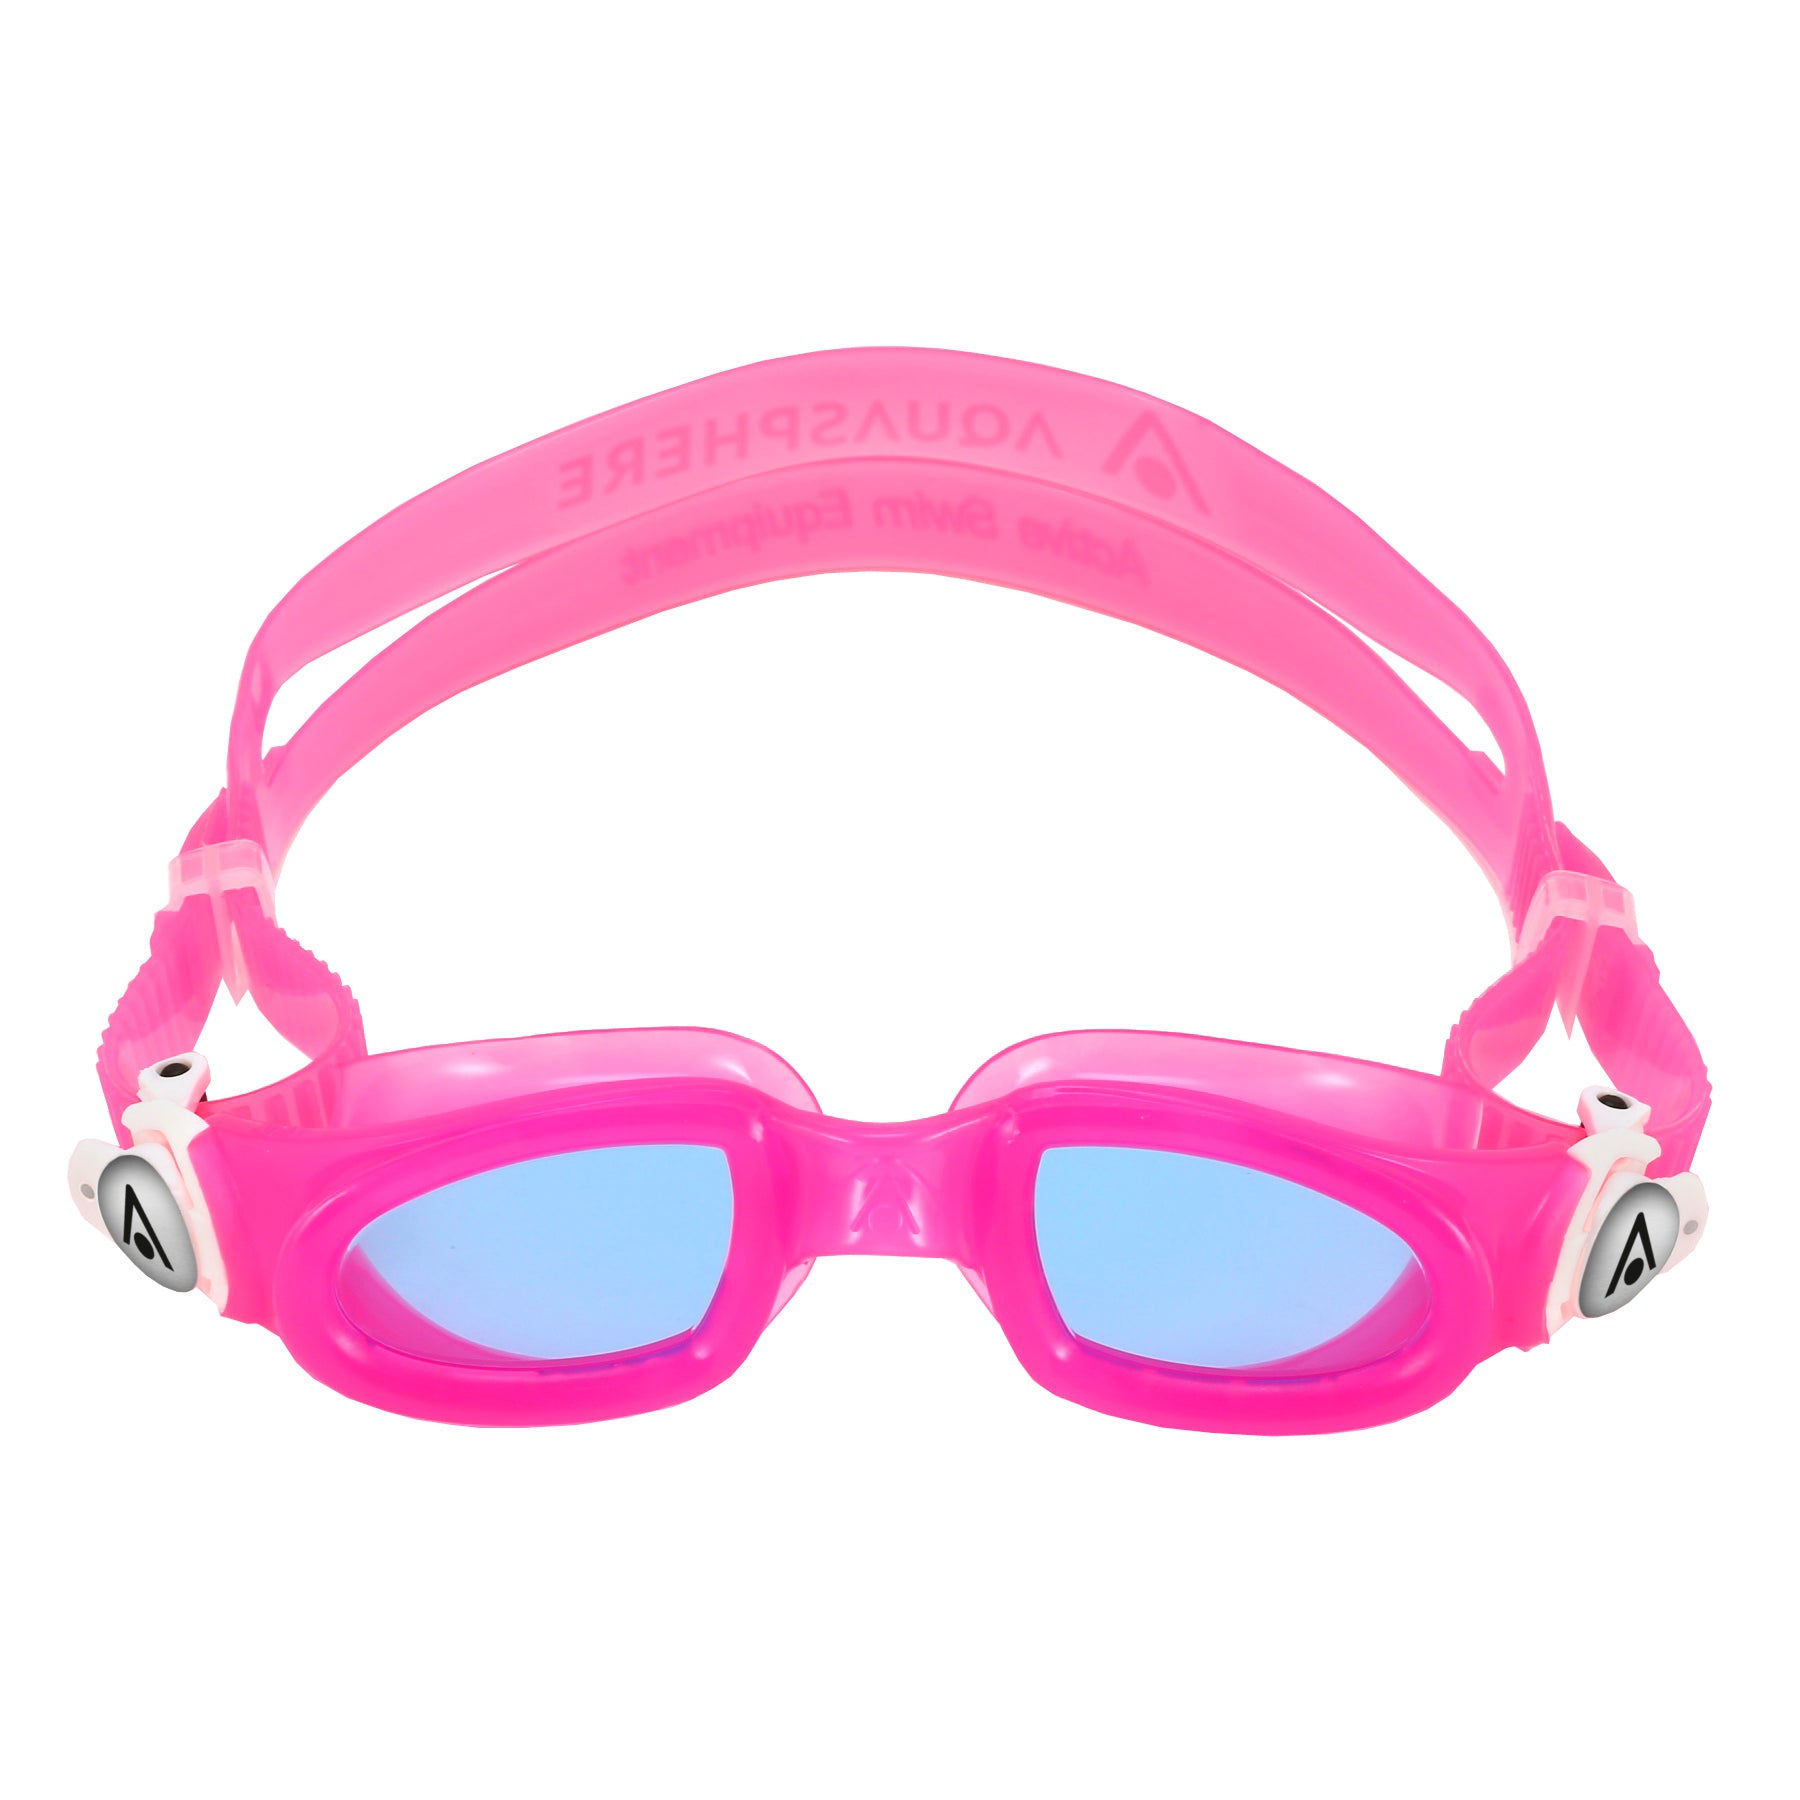 Aqua Sphere Moby Kids Goggle Pink/White/Tinted